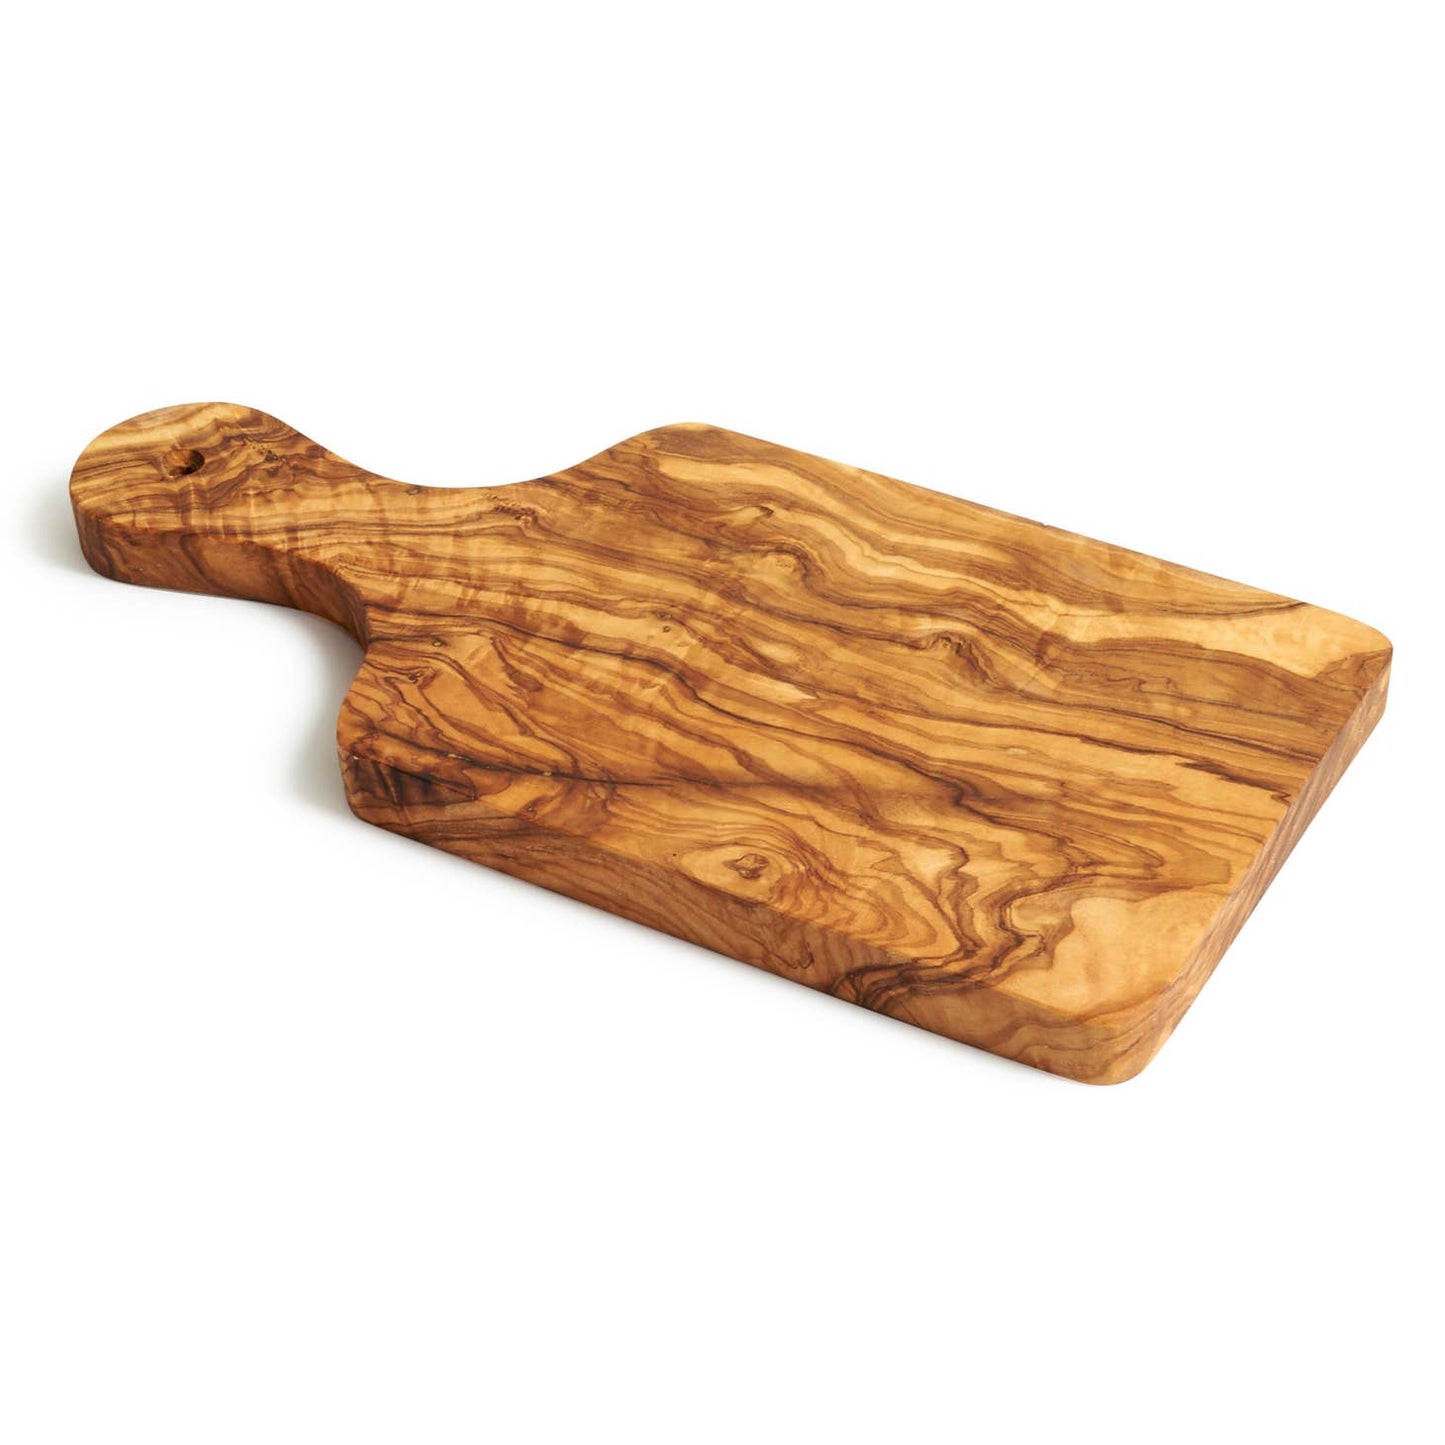 The Paddle Board is suitable for cutting bread, slicing cheese, chopping vegetables and carving meat. Olive wood is a hard wood making it very dense and durable for everyday use. Handmade in Tunisia.